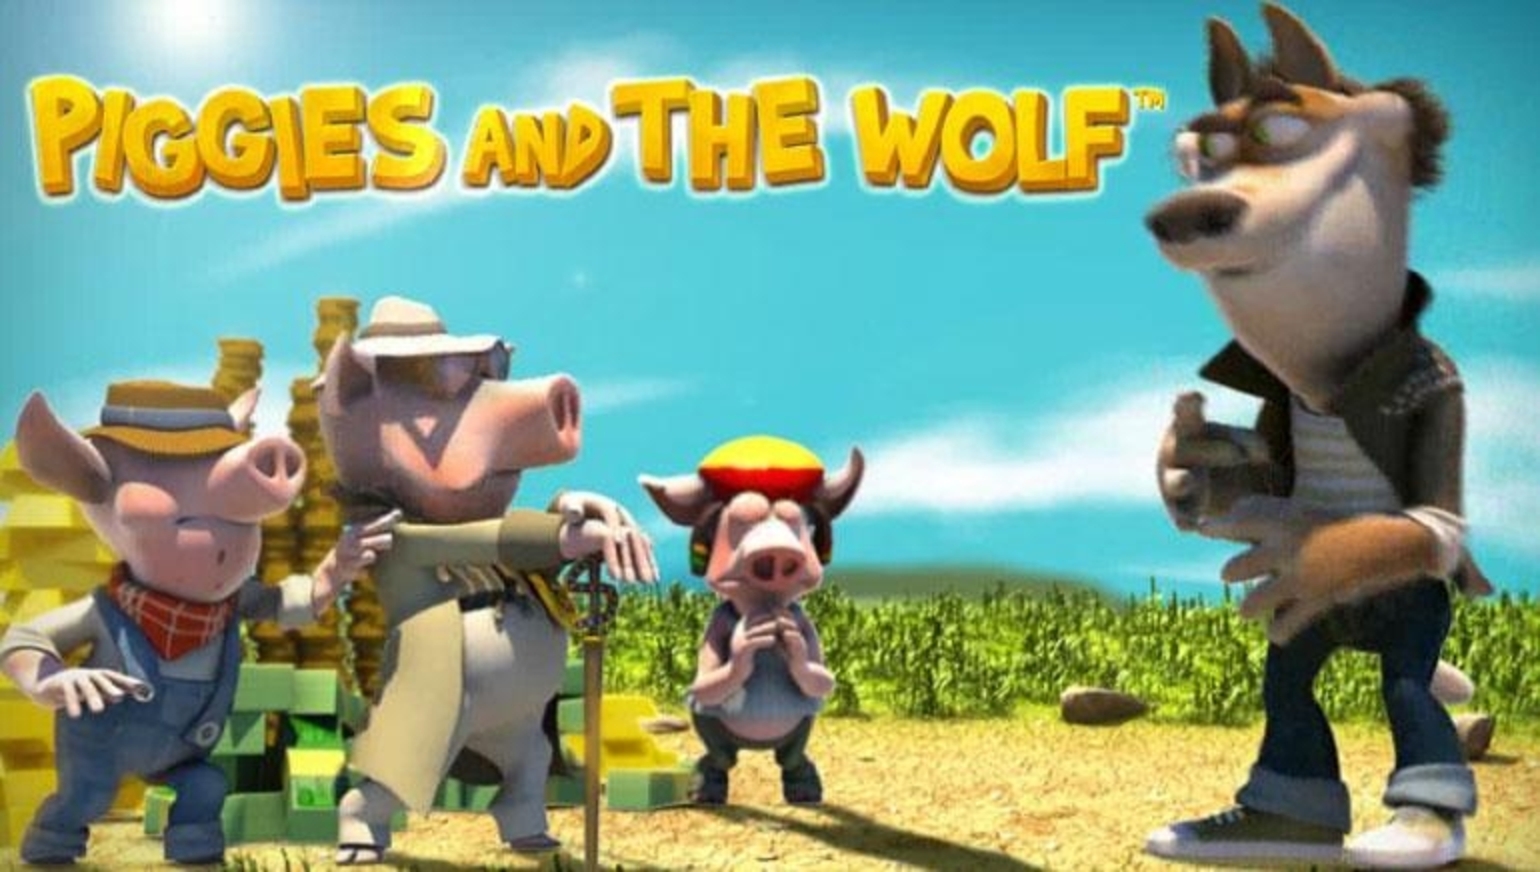 Piggies and The Wolf demo